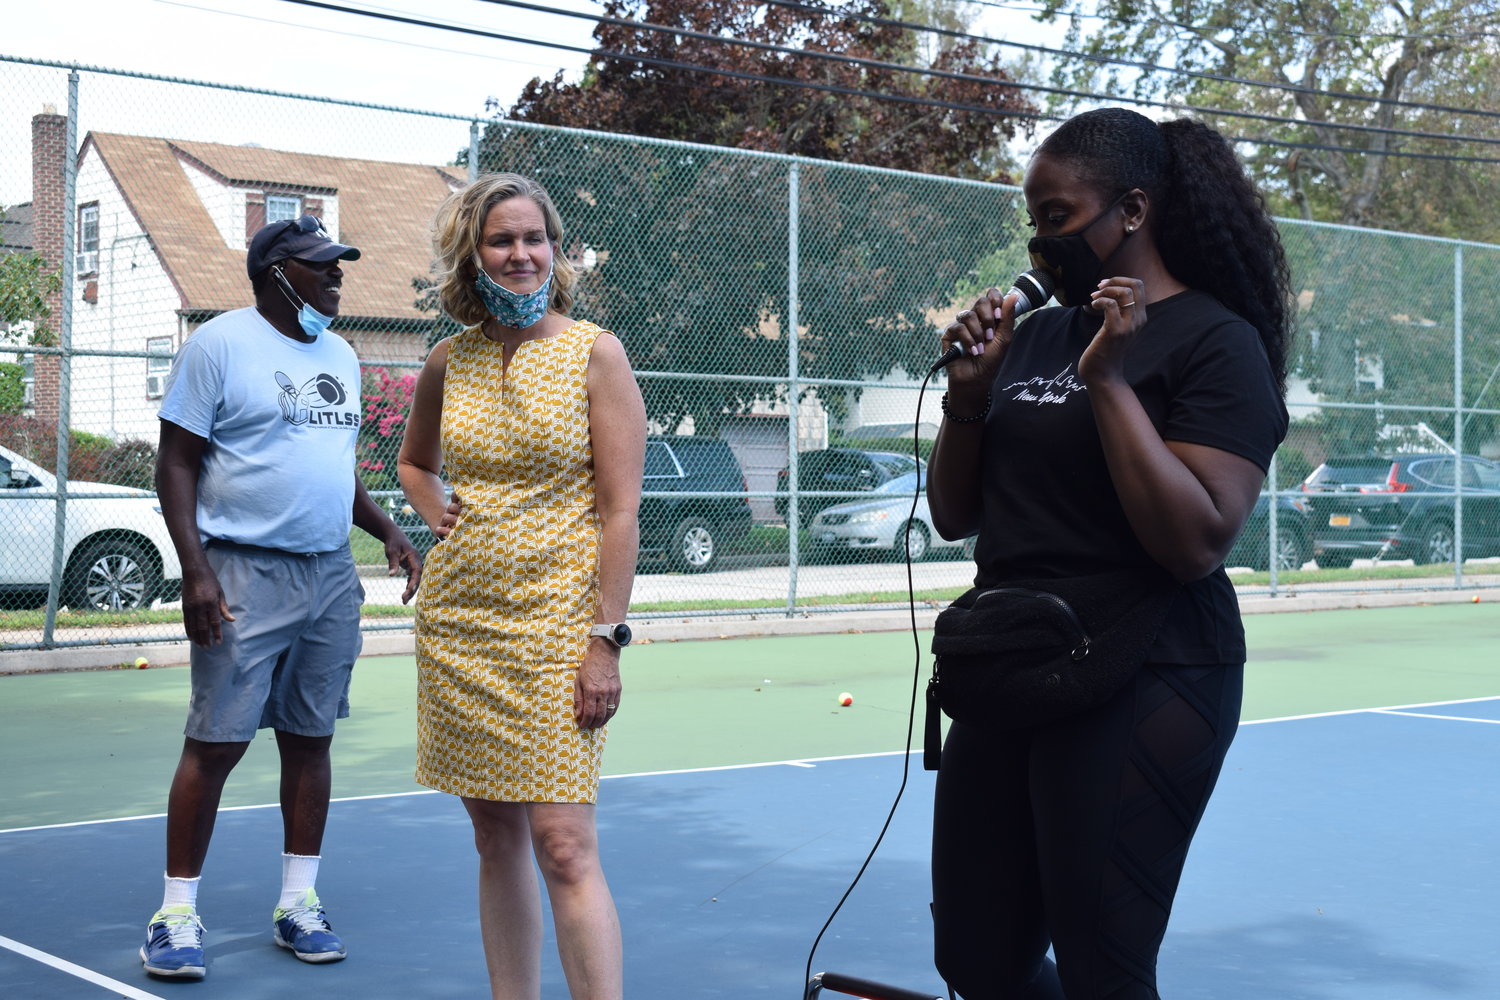 State Assemblywoman Taylor Darling, right, and Nassau County Executive Laura Curran shared their experiences learning tennis from Daniel Burgess.